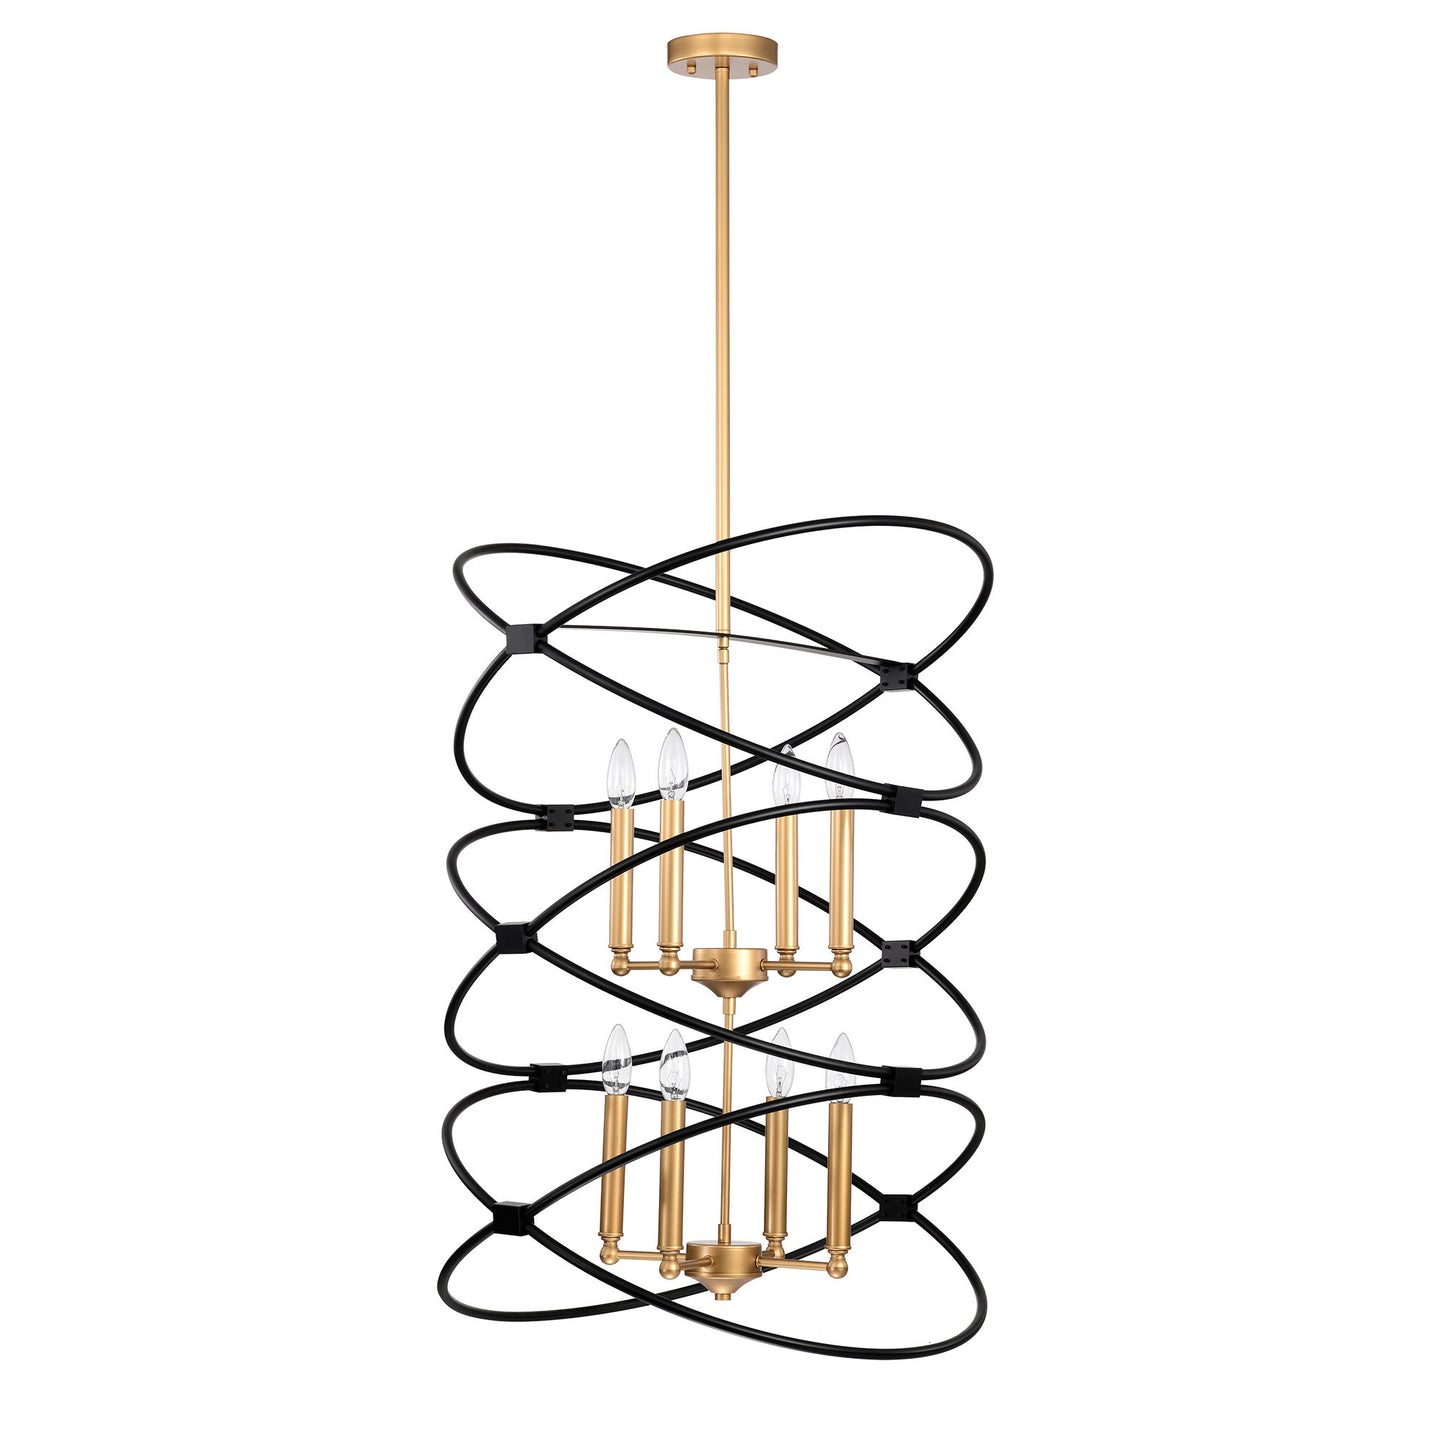 Transitional Gold/Matte Black Metal Chandelier Fixture, 8 lights, 2-Tier-Candle Ceiling Light for Living Room, Bedroom, Dining Room, Dimmable, E12, W23.6*H55